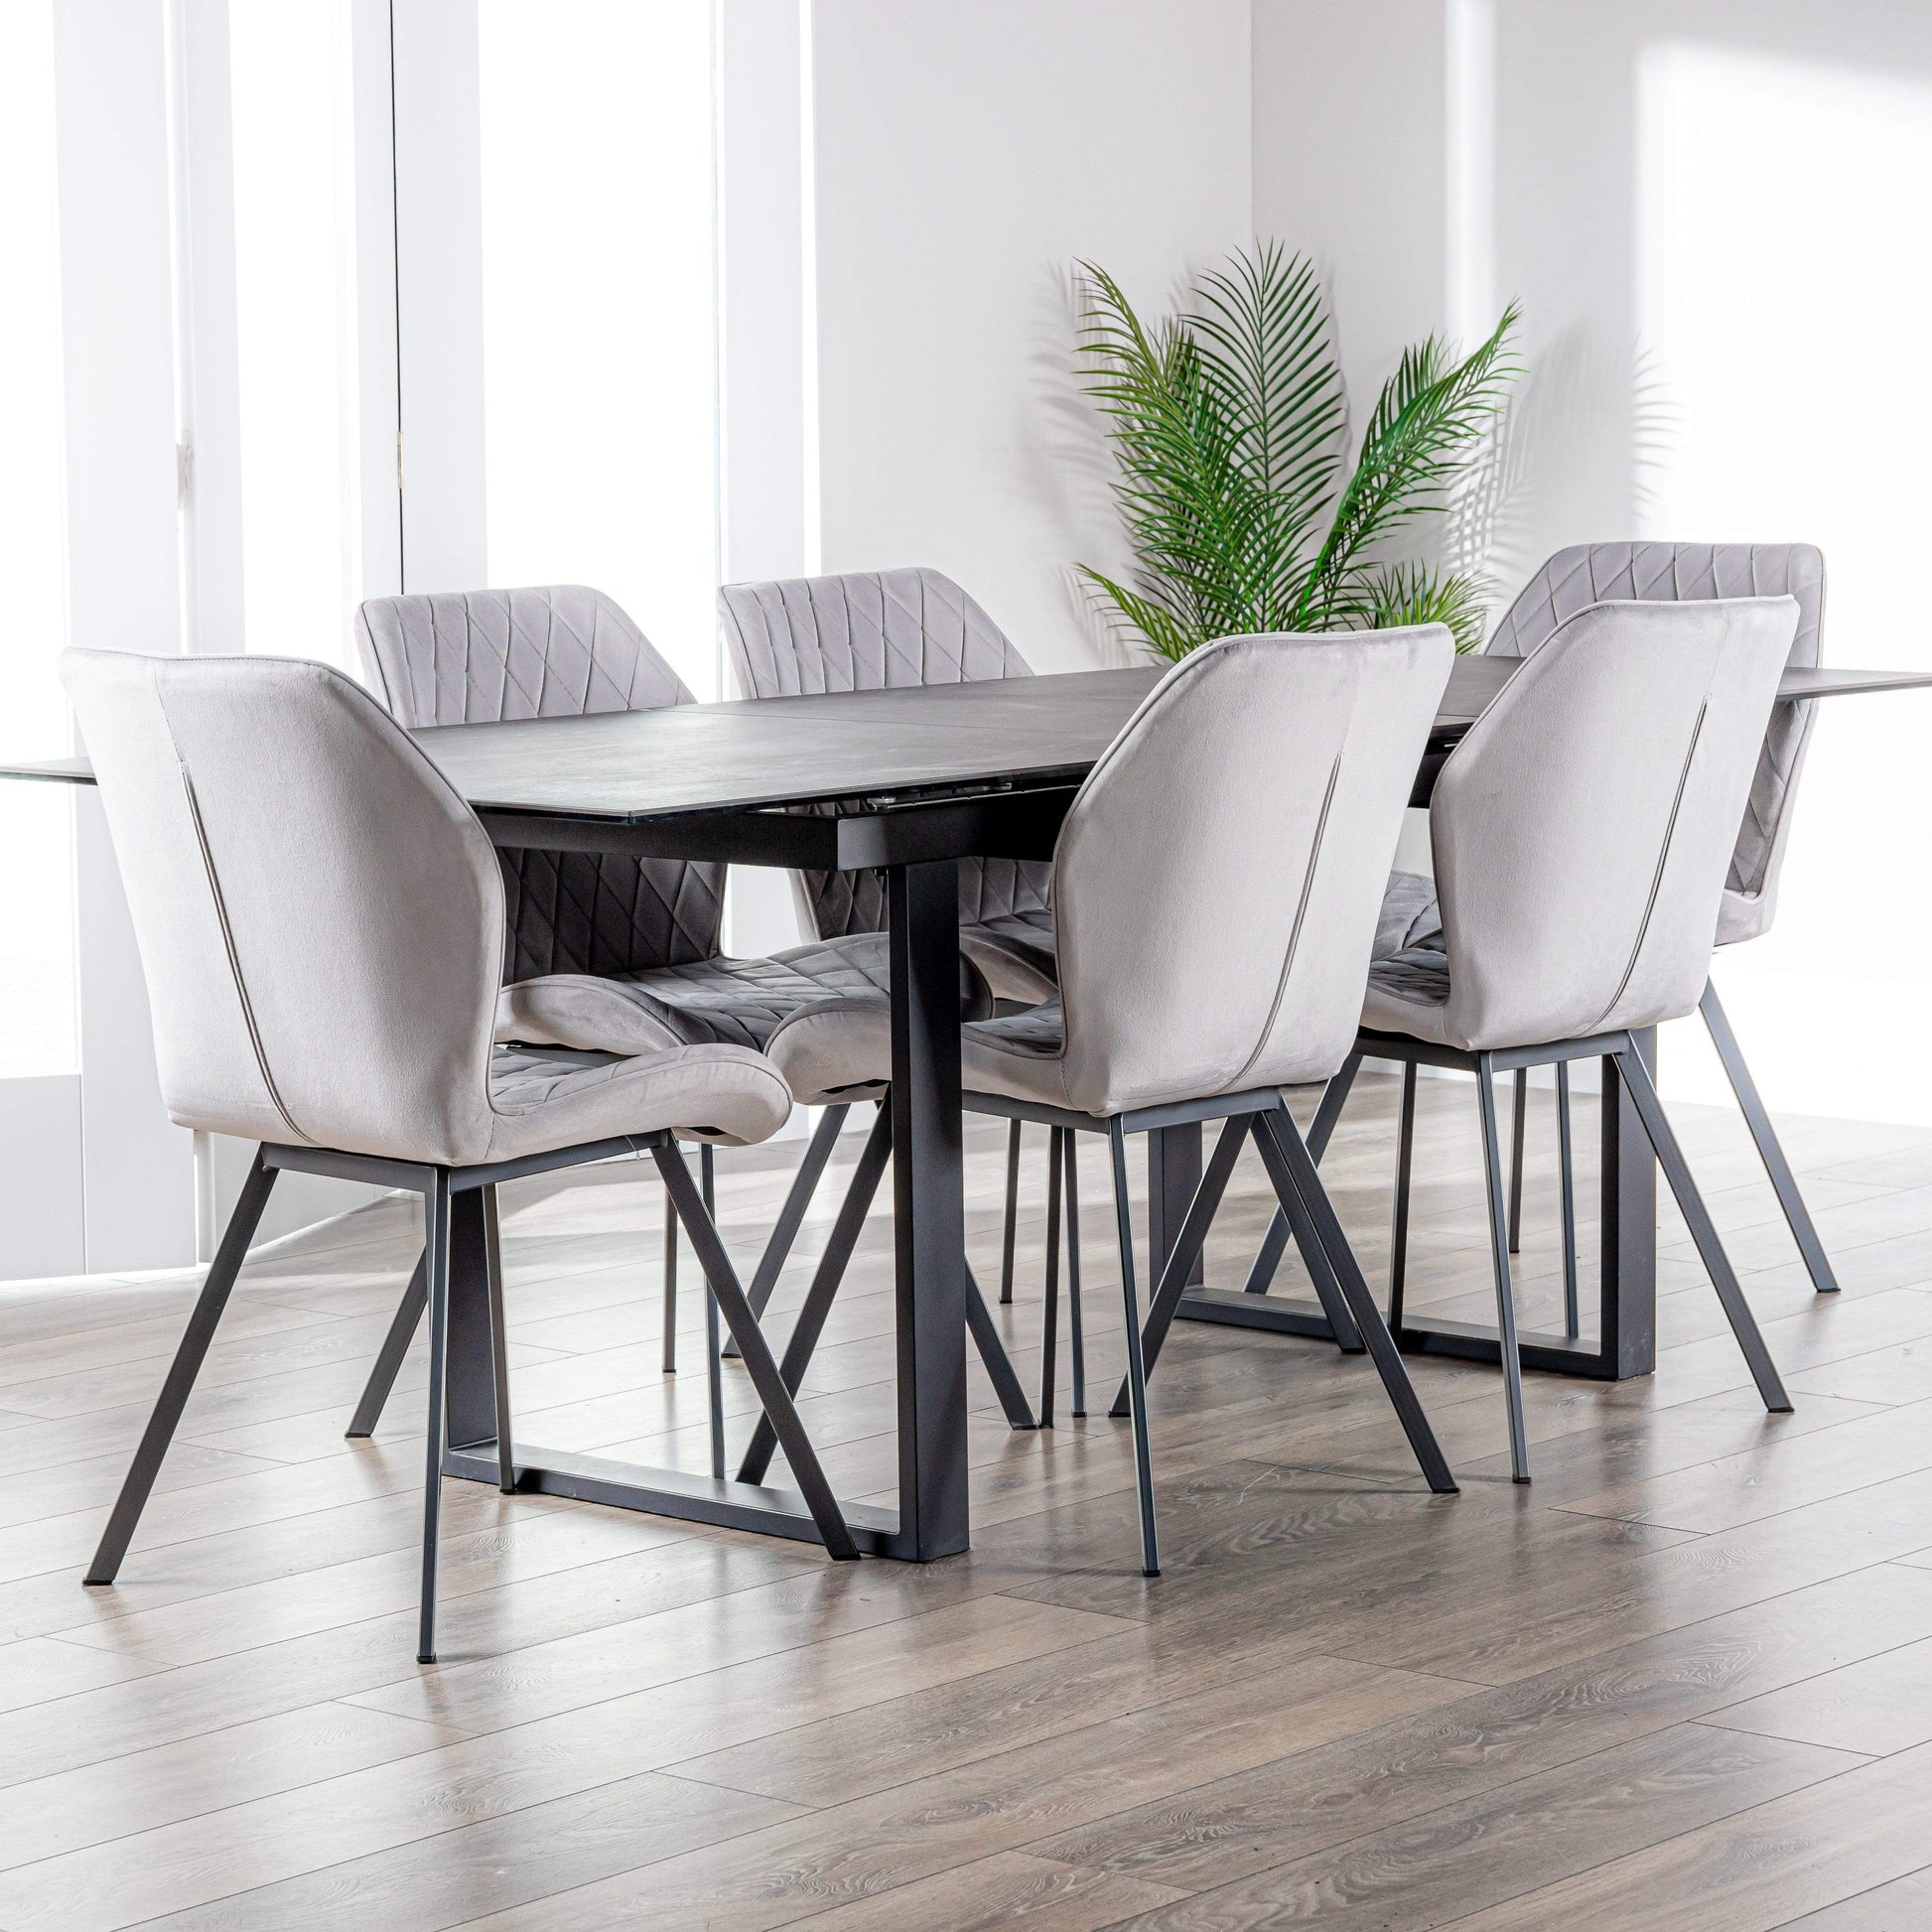 Furniture  -  Cuba Table And 6 Vancouver Chairs Dining Set  -  60000639